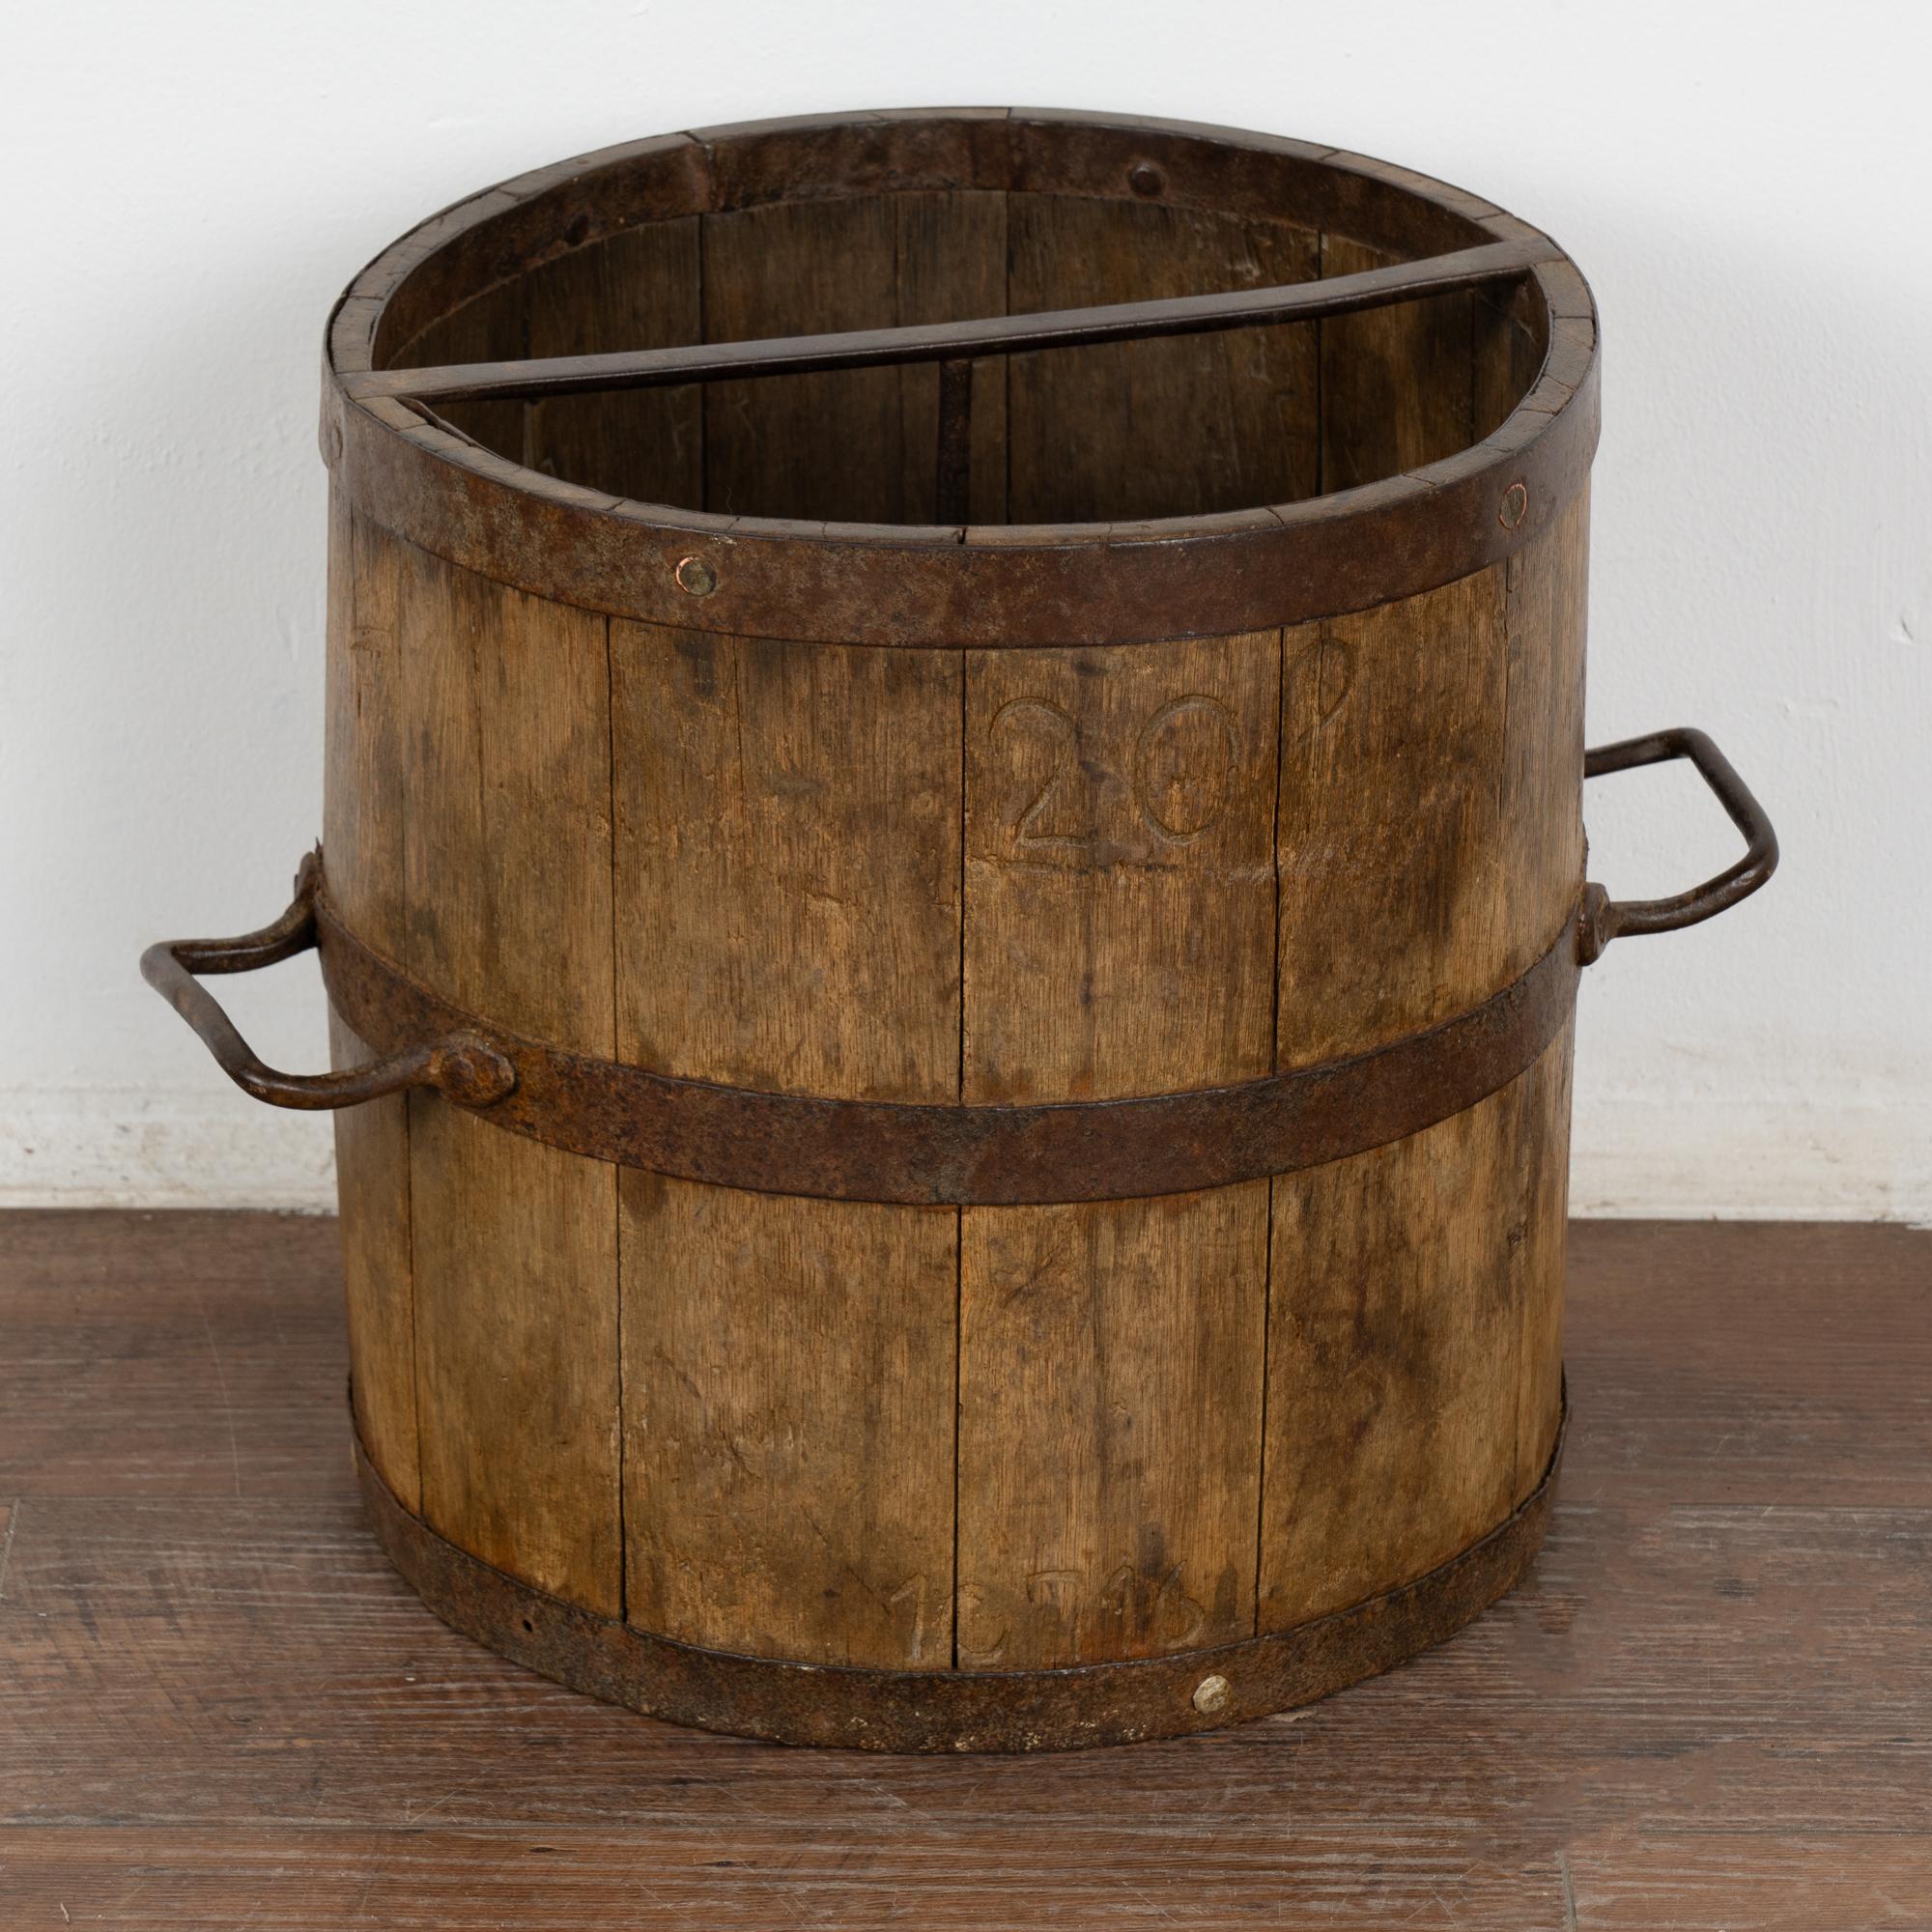 20 liter old oak measuring bucket with iron banding and handles. 
Iron cross bar and central rod that connects cross bar to bottom of bucket interior. 
In stable, waxed condition.
Any scratches, cracks, dings, or age related separation are